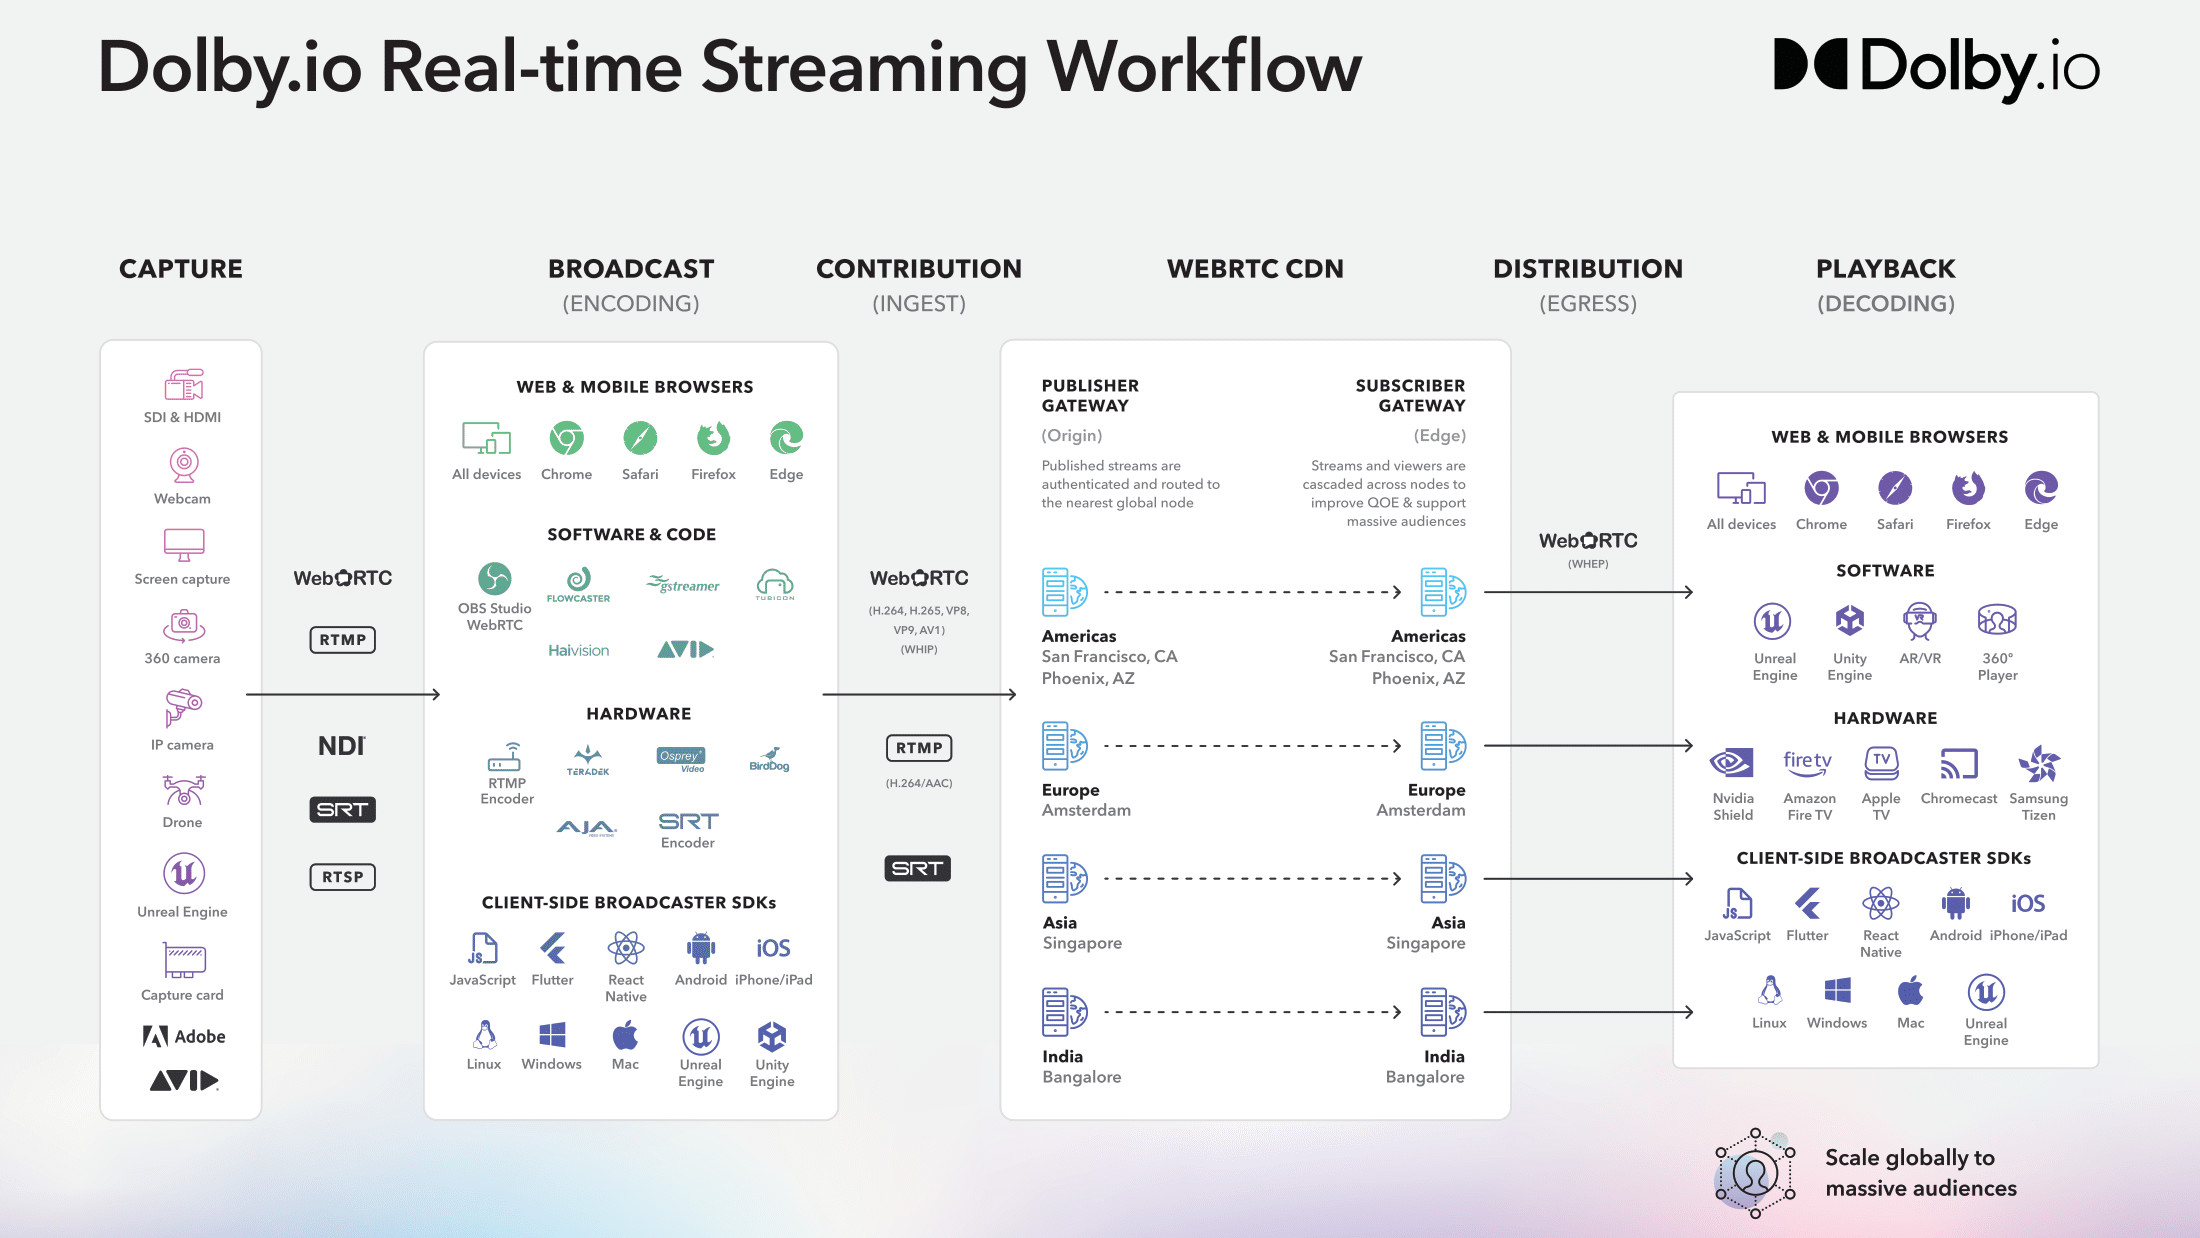 The Dolby.io real-time streaming workflow breaking down how to capture, broadcast, contribute, distribute, and playback dolby.io webrtc streams.